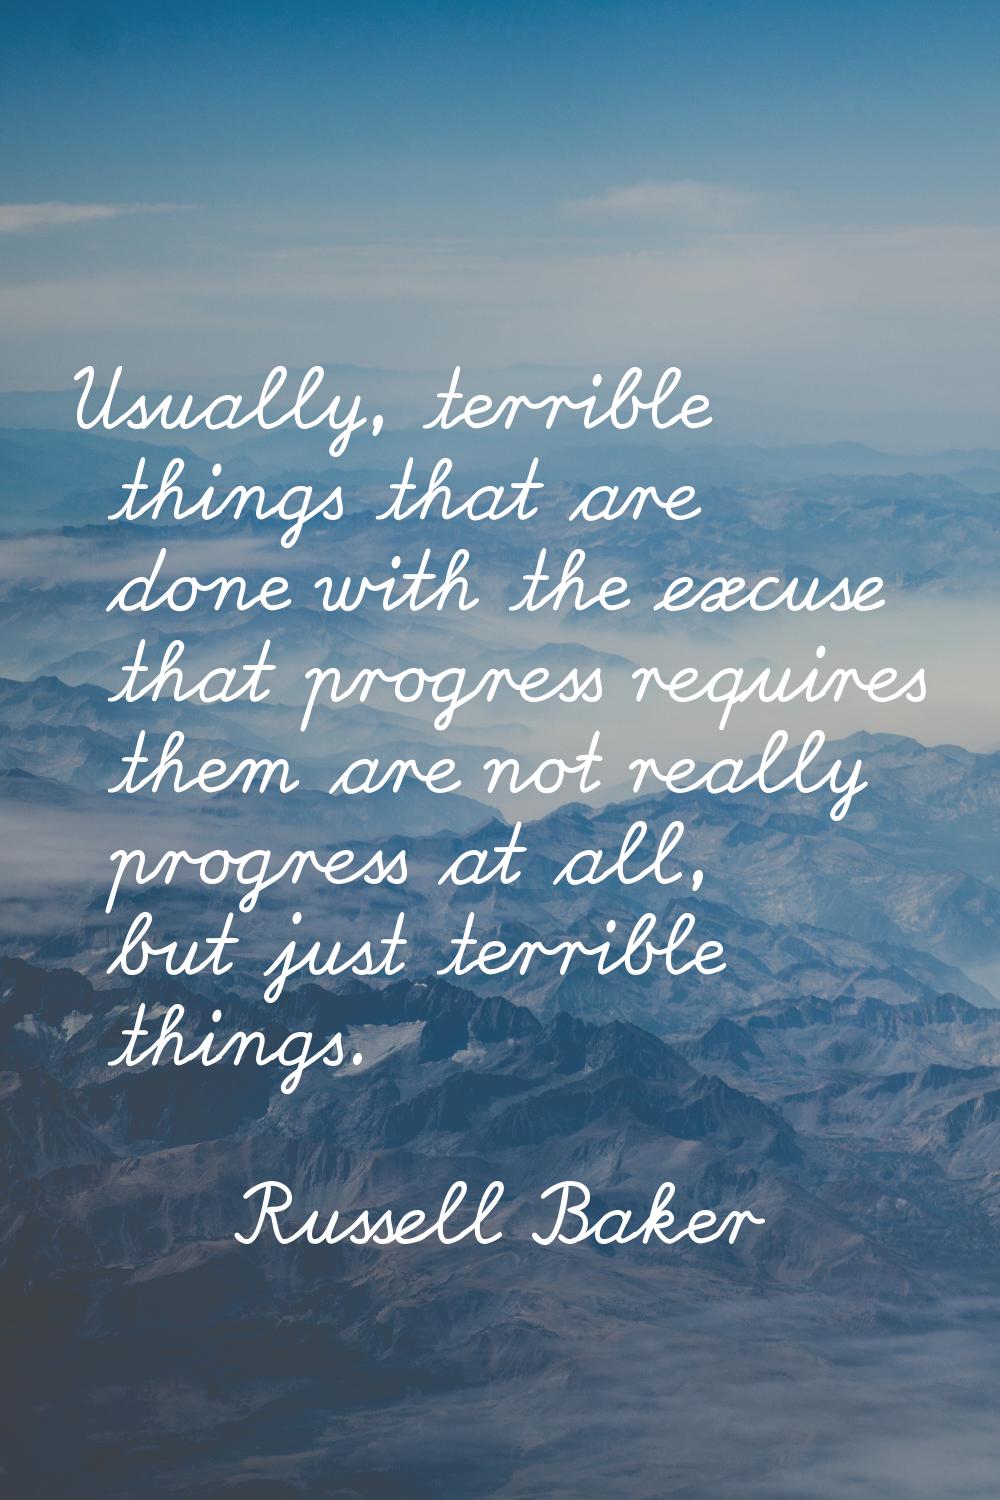 Usually, terrible things that are done with the excuse that progress requires them are not really p